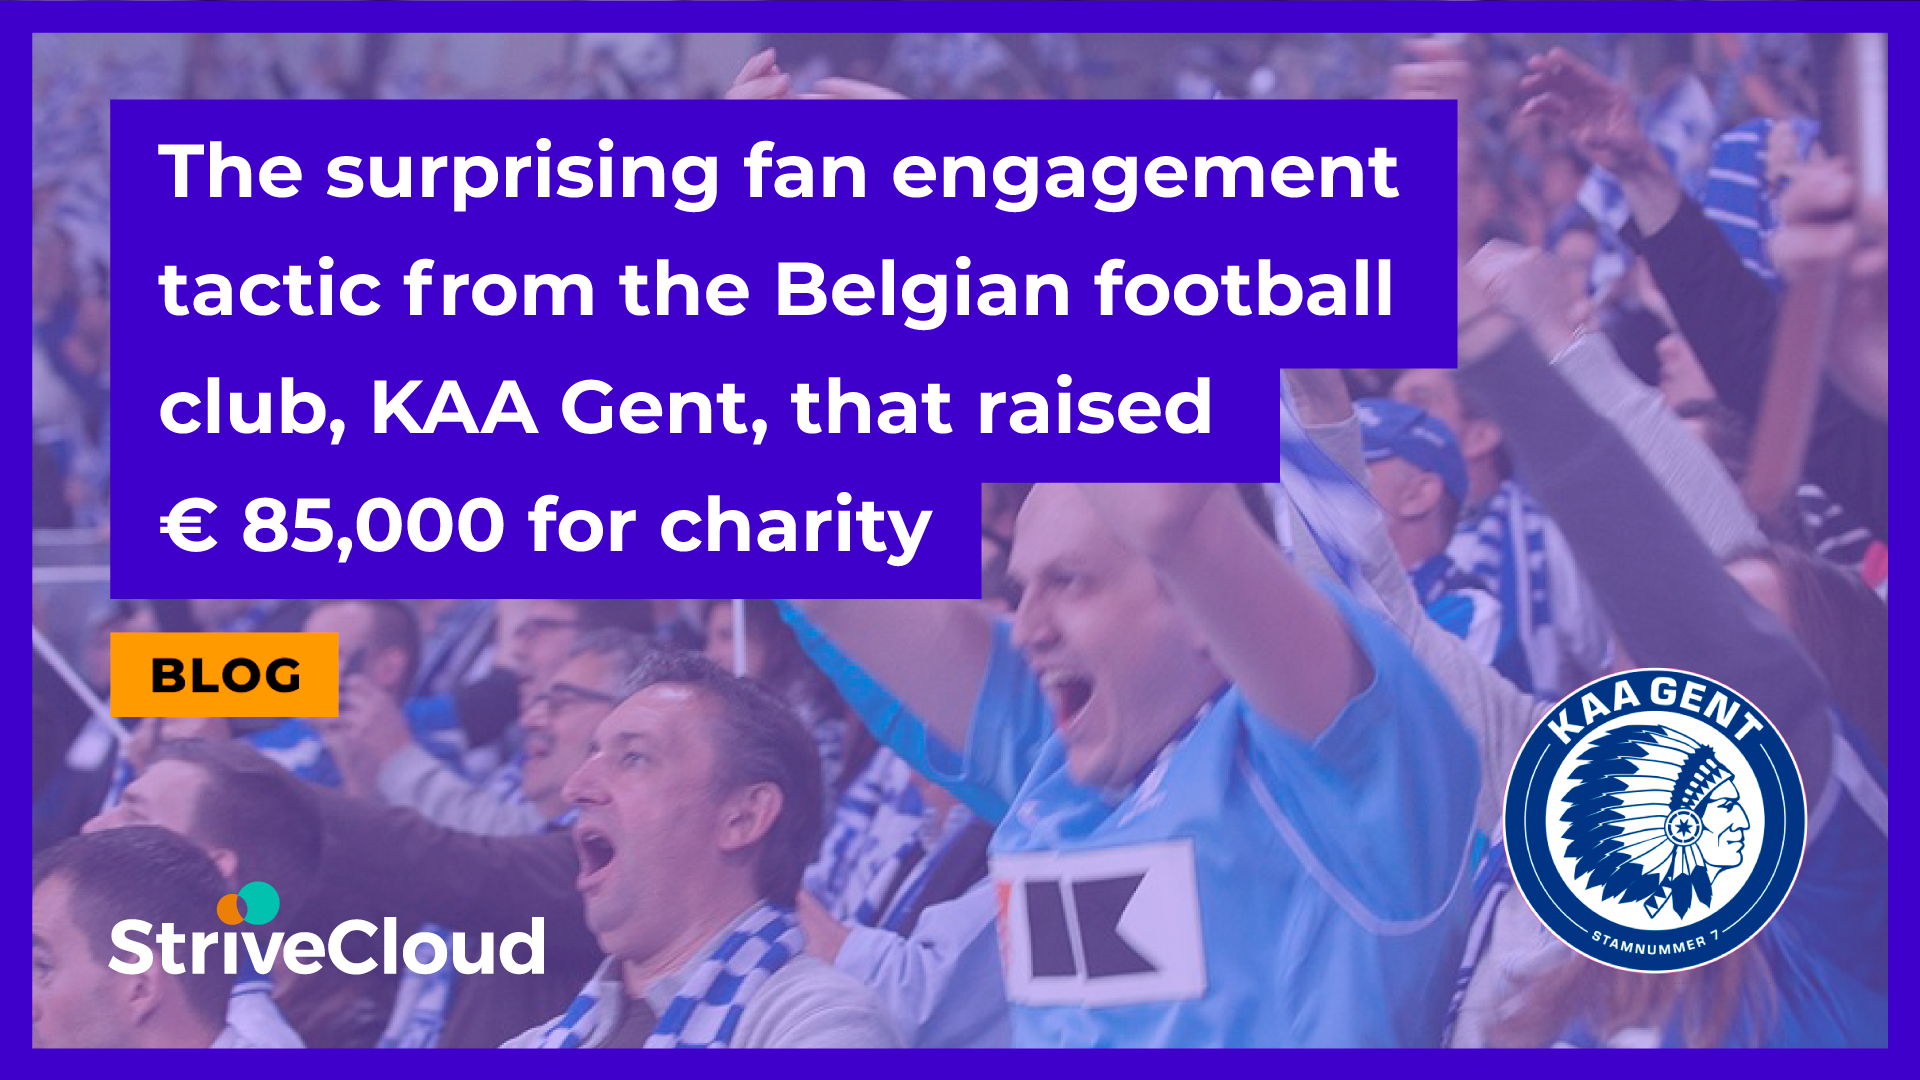 The surprising fan engagement tactic from the Belgian football club, KAA Gent, that raised € 85,000 for charity